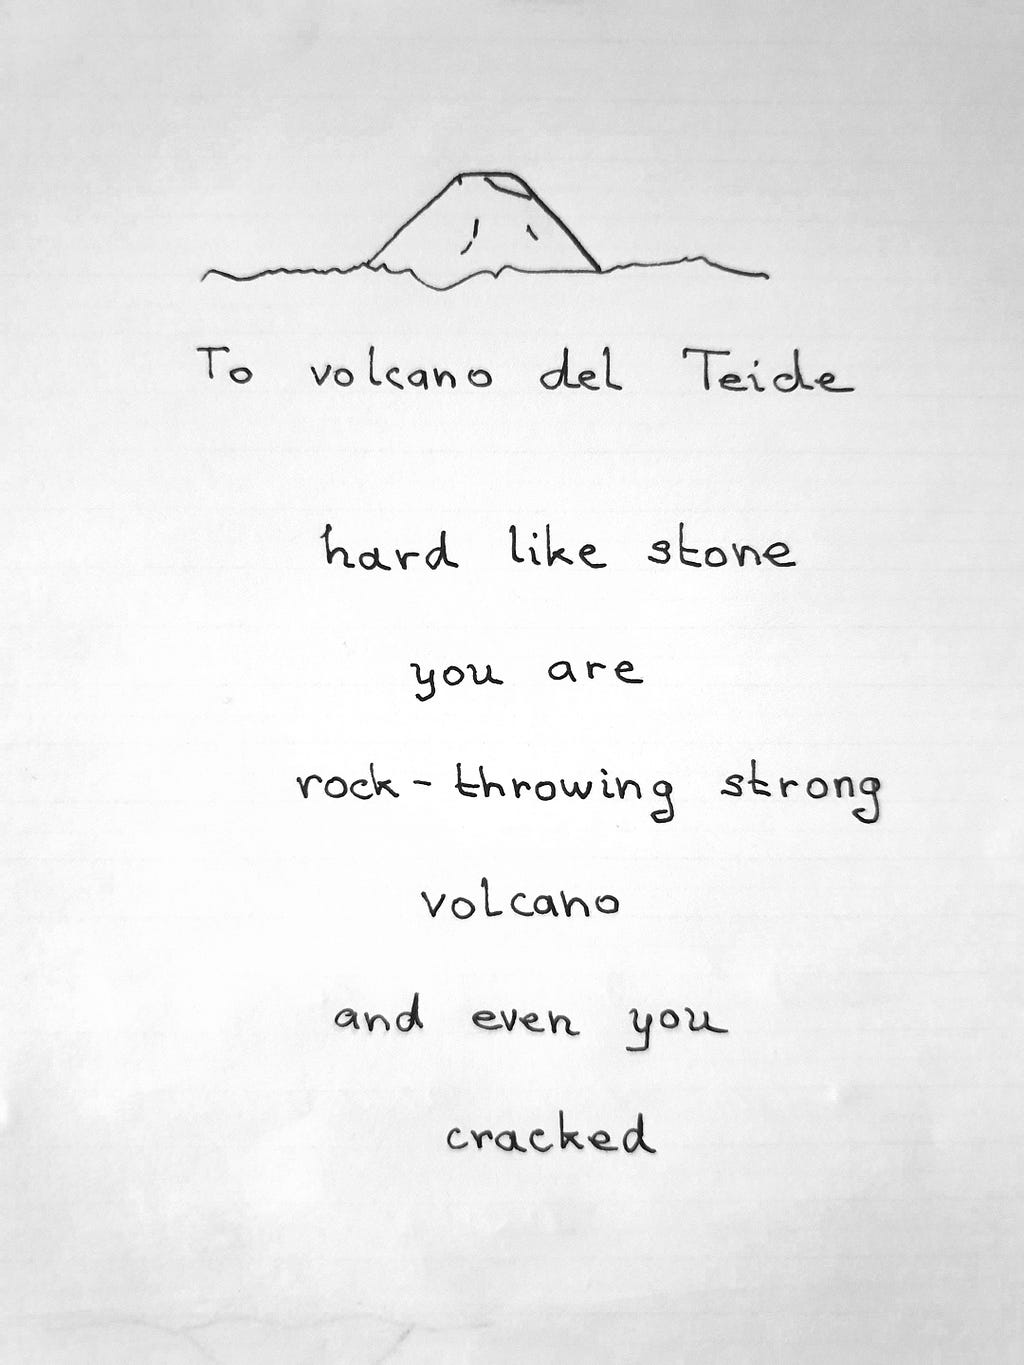 Handwritten text of the poem with a small drawing of volcano del Teide at the top.